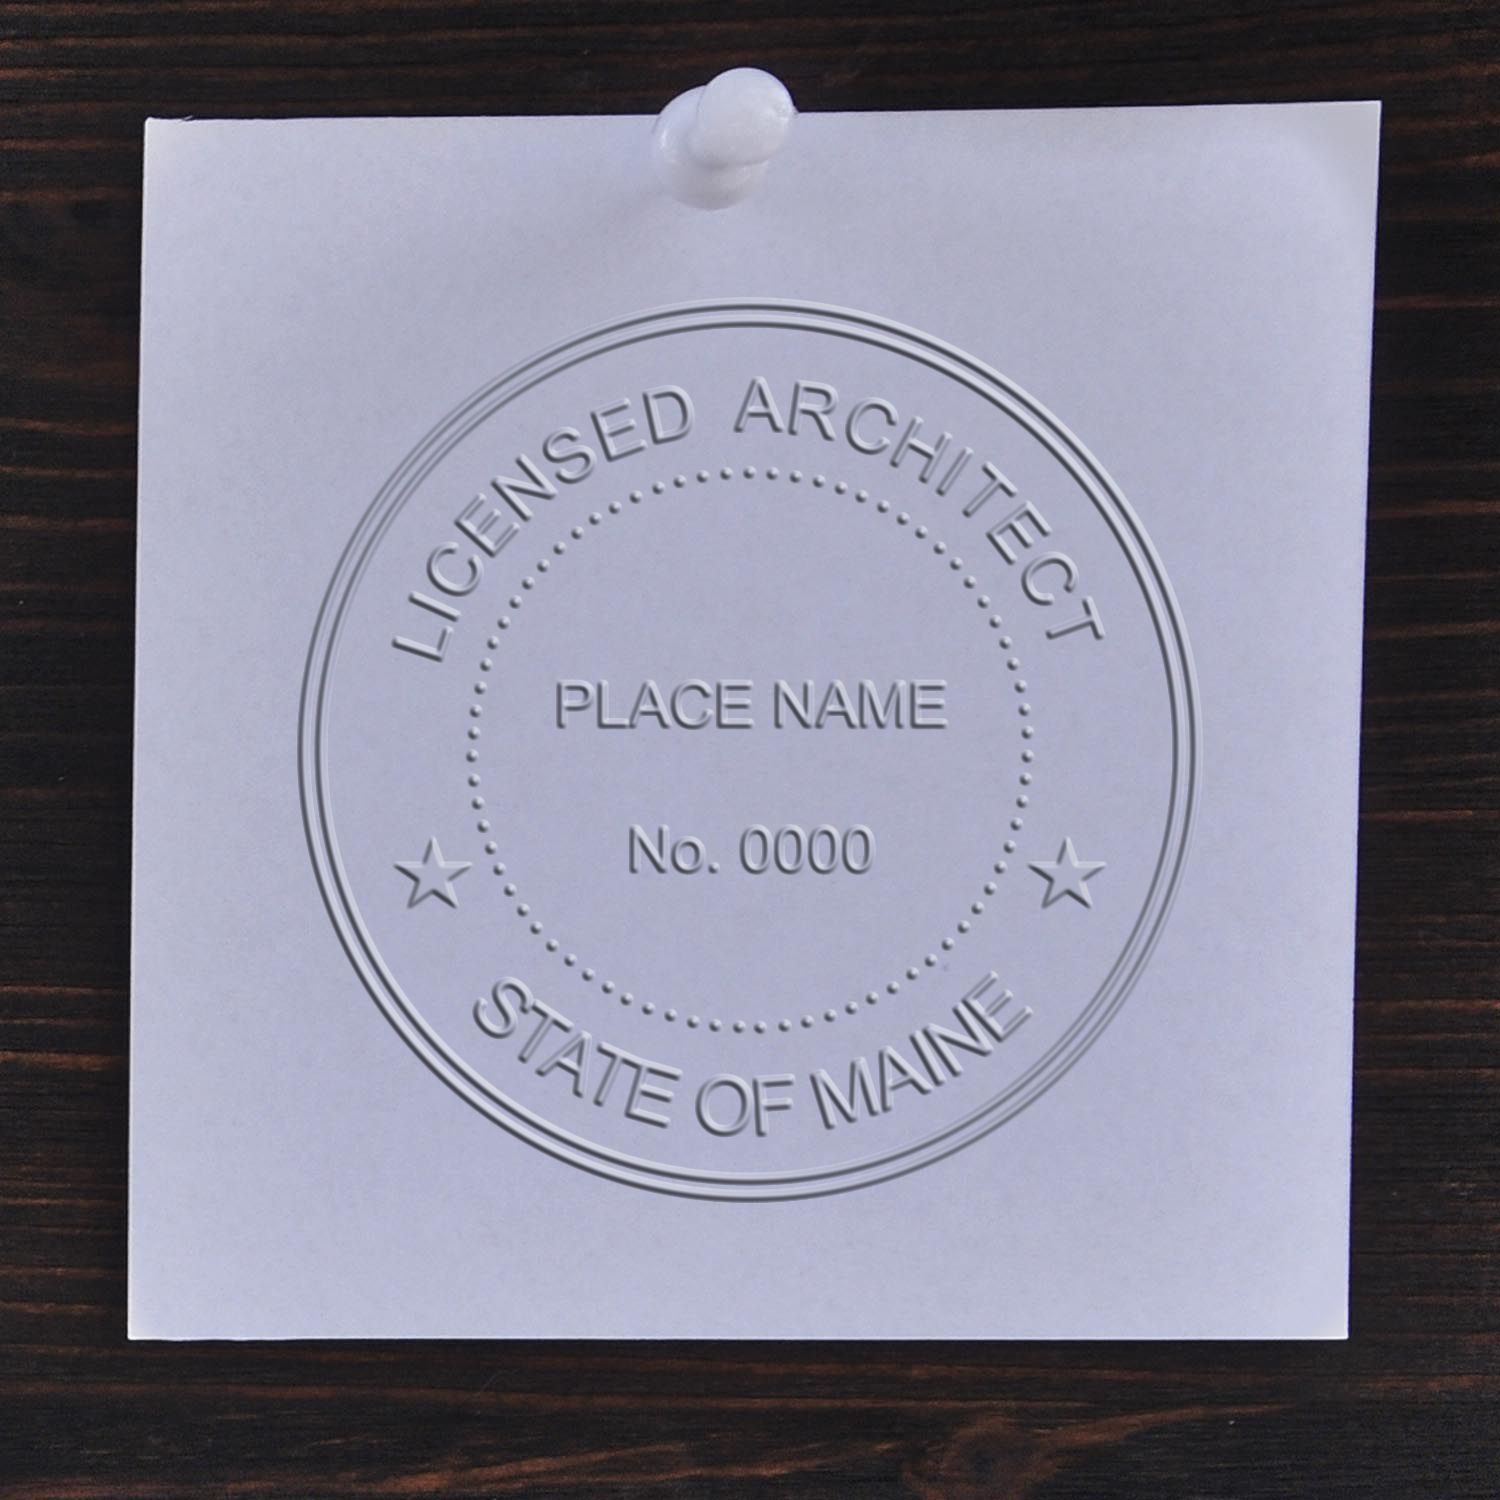 A lifestyle photo showing a stamped image of the Maine Desk Architect Embossing Seal on a piece of paper